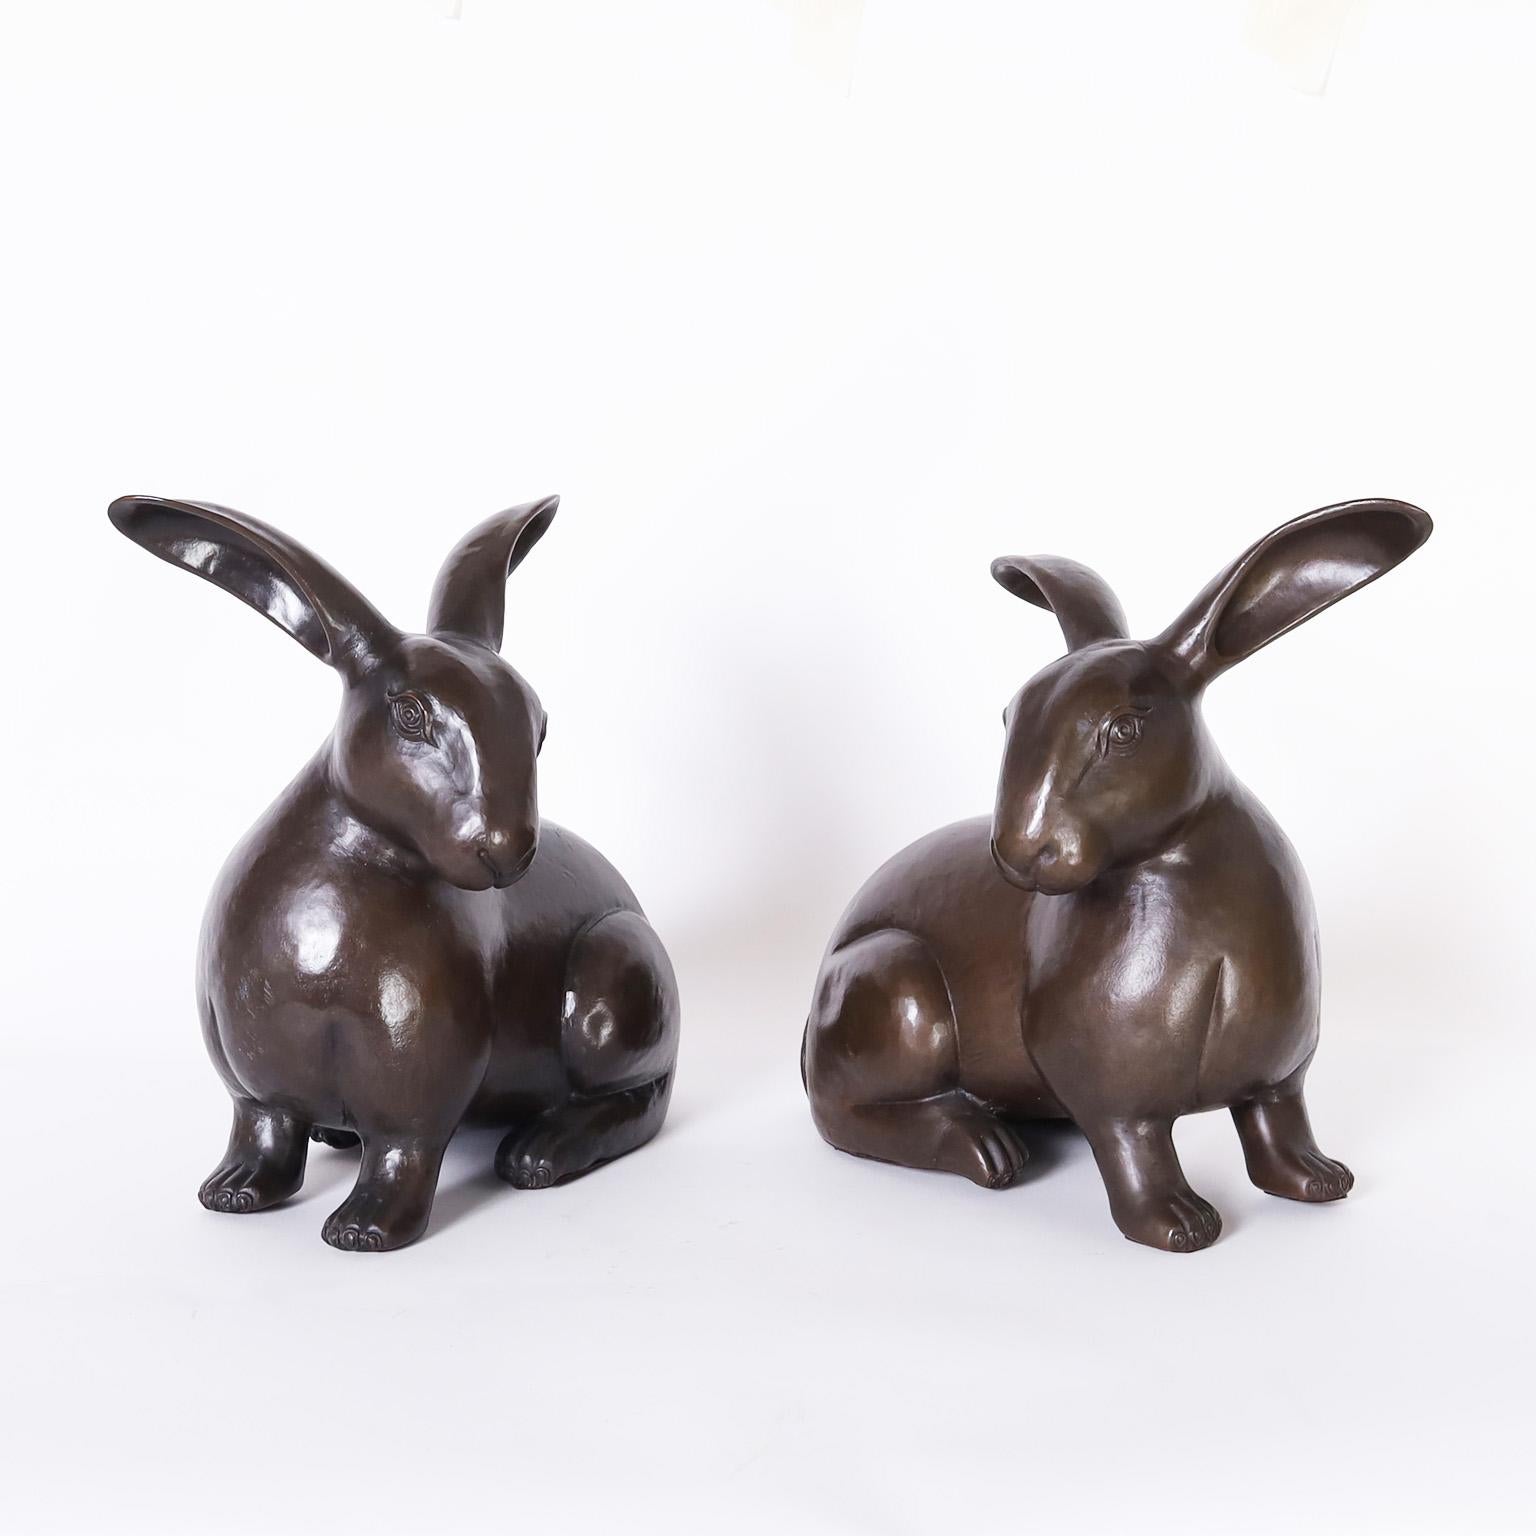 Pair of bunnies or rabbits hand crafted in copper and having a bronze like patina indistinctly signed on a leg.